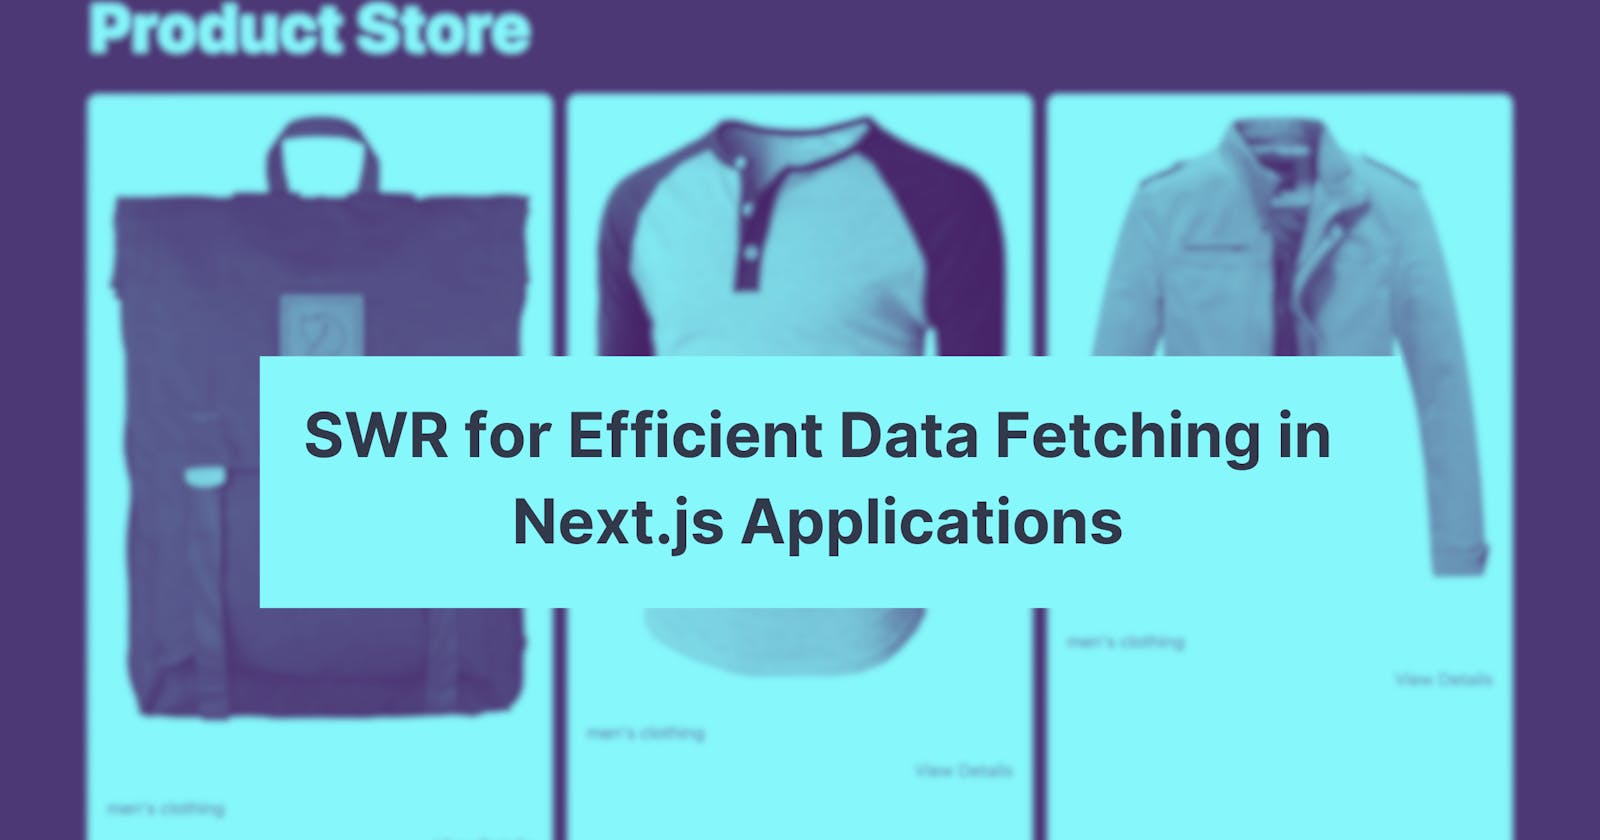 Using SWR for Efficient Data Fetching in Next.js Applications